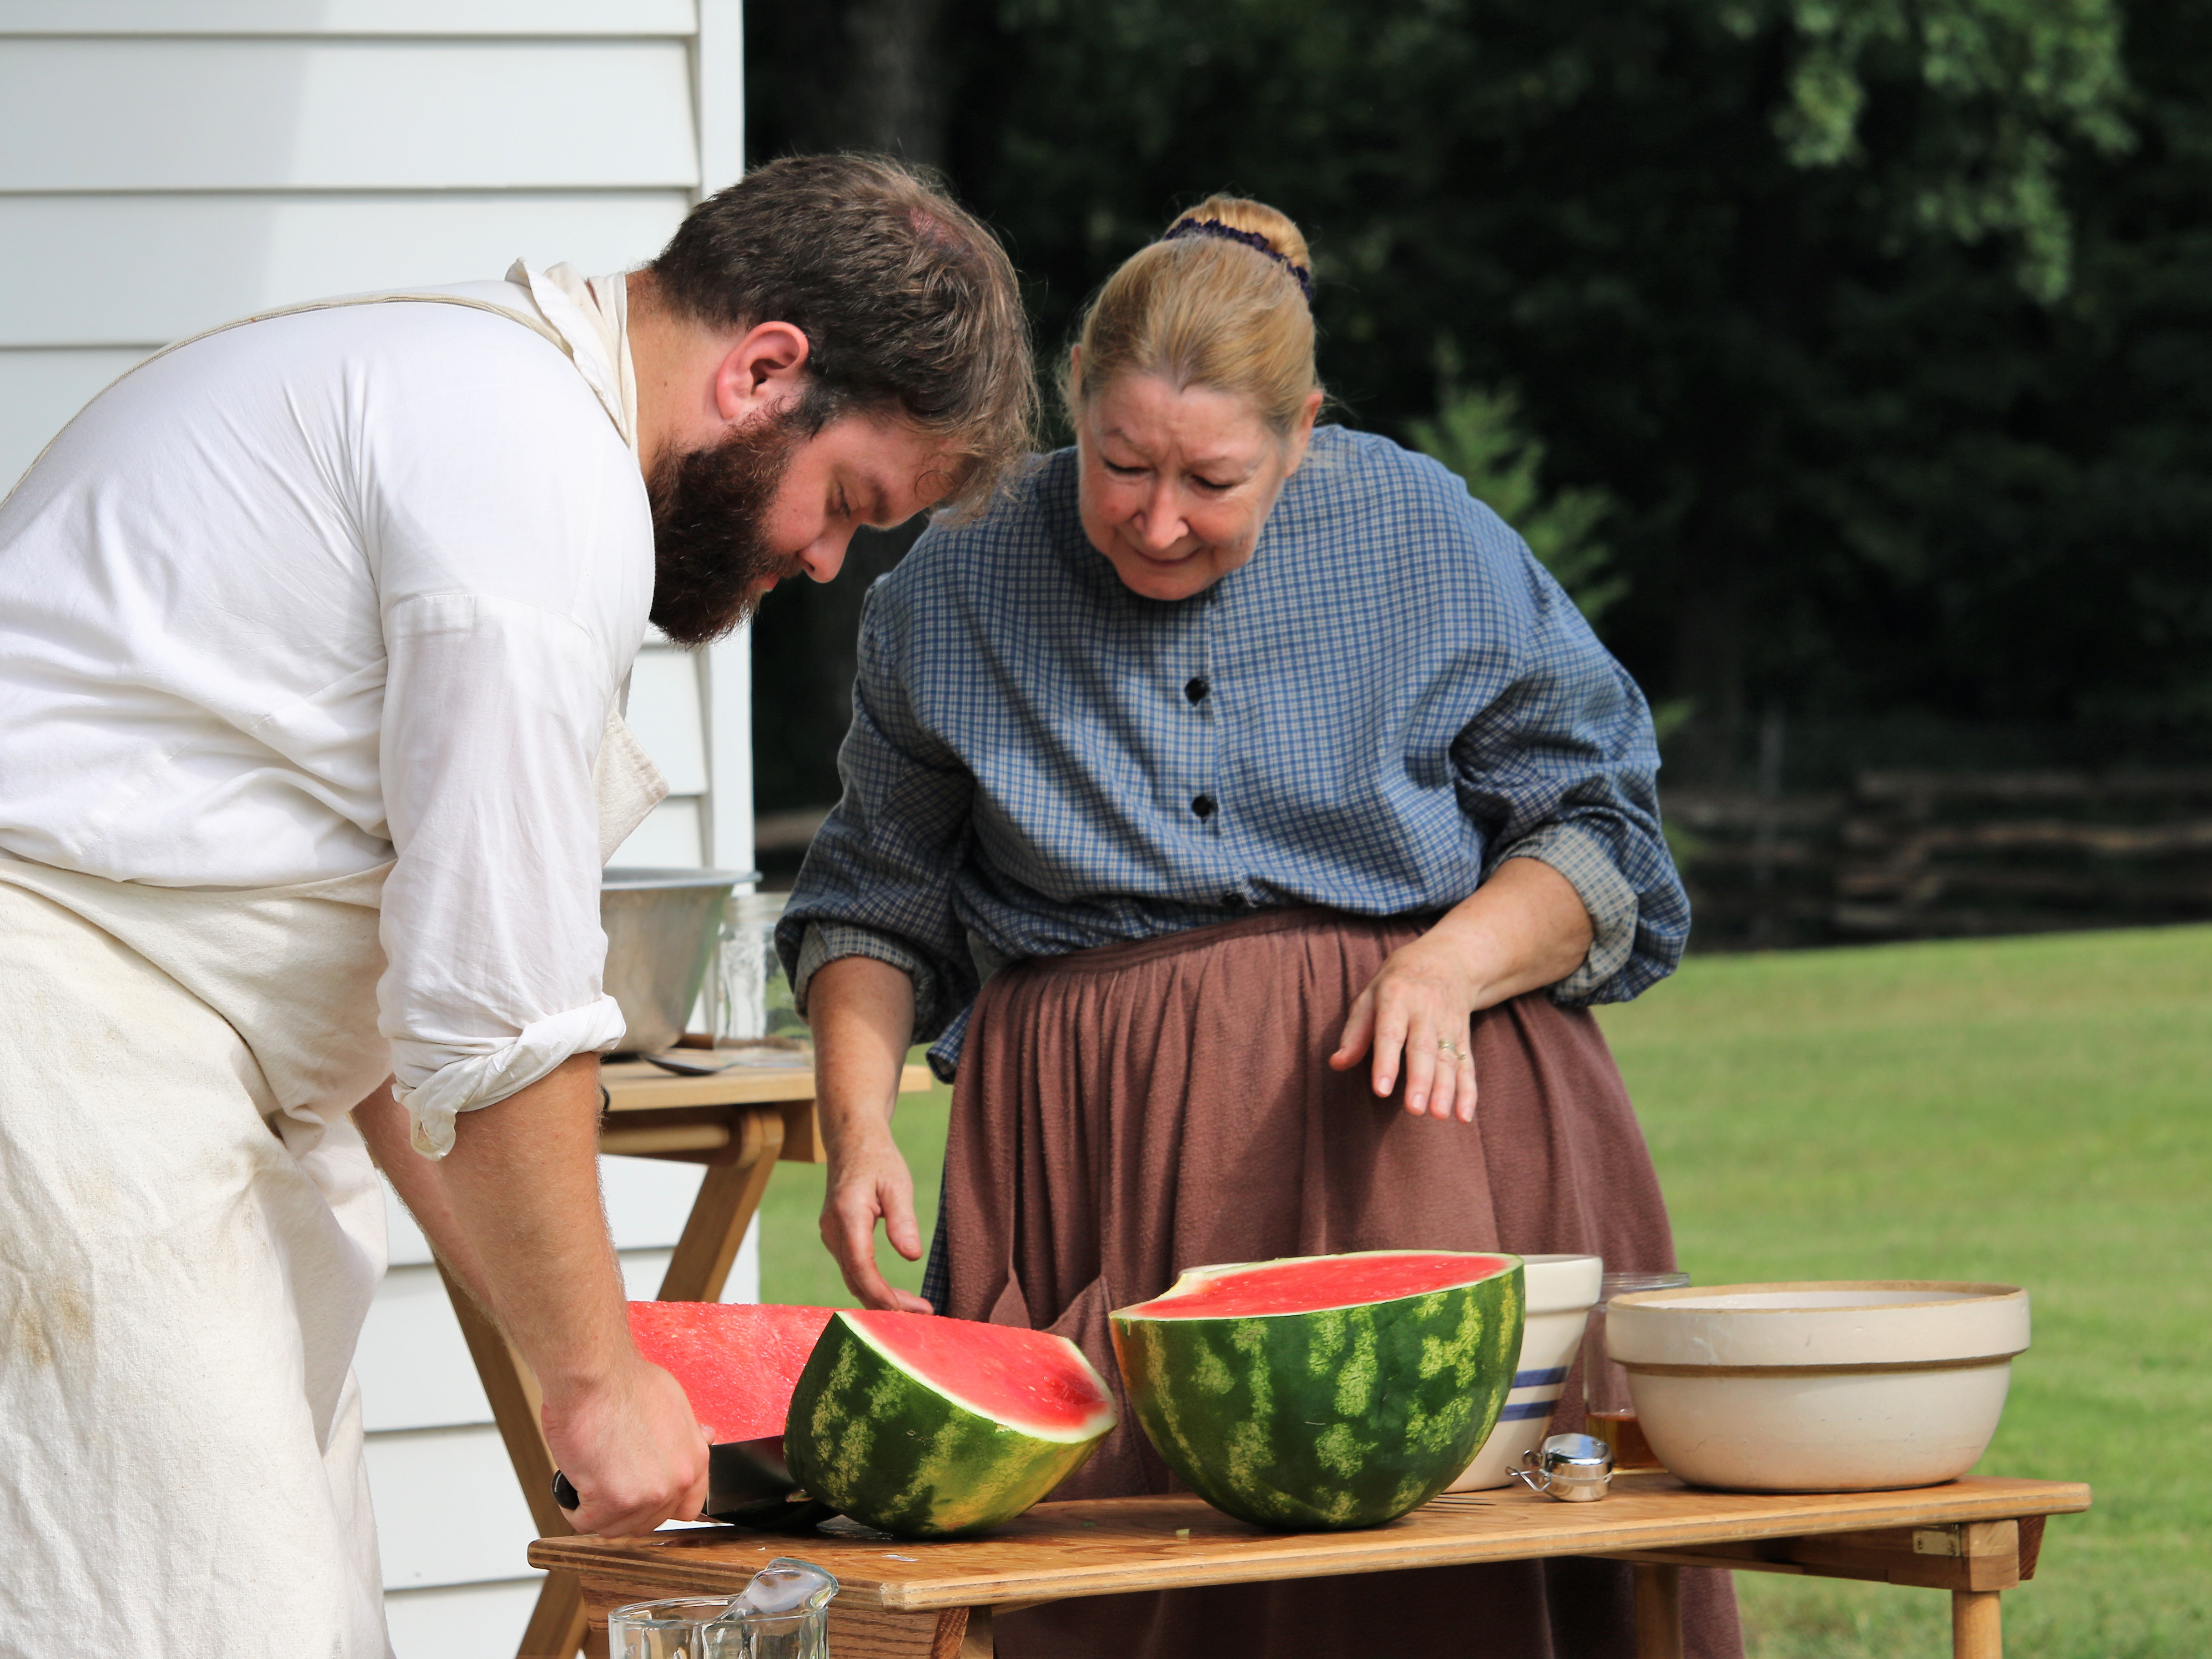 A soldier and laundress preparing watermelon